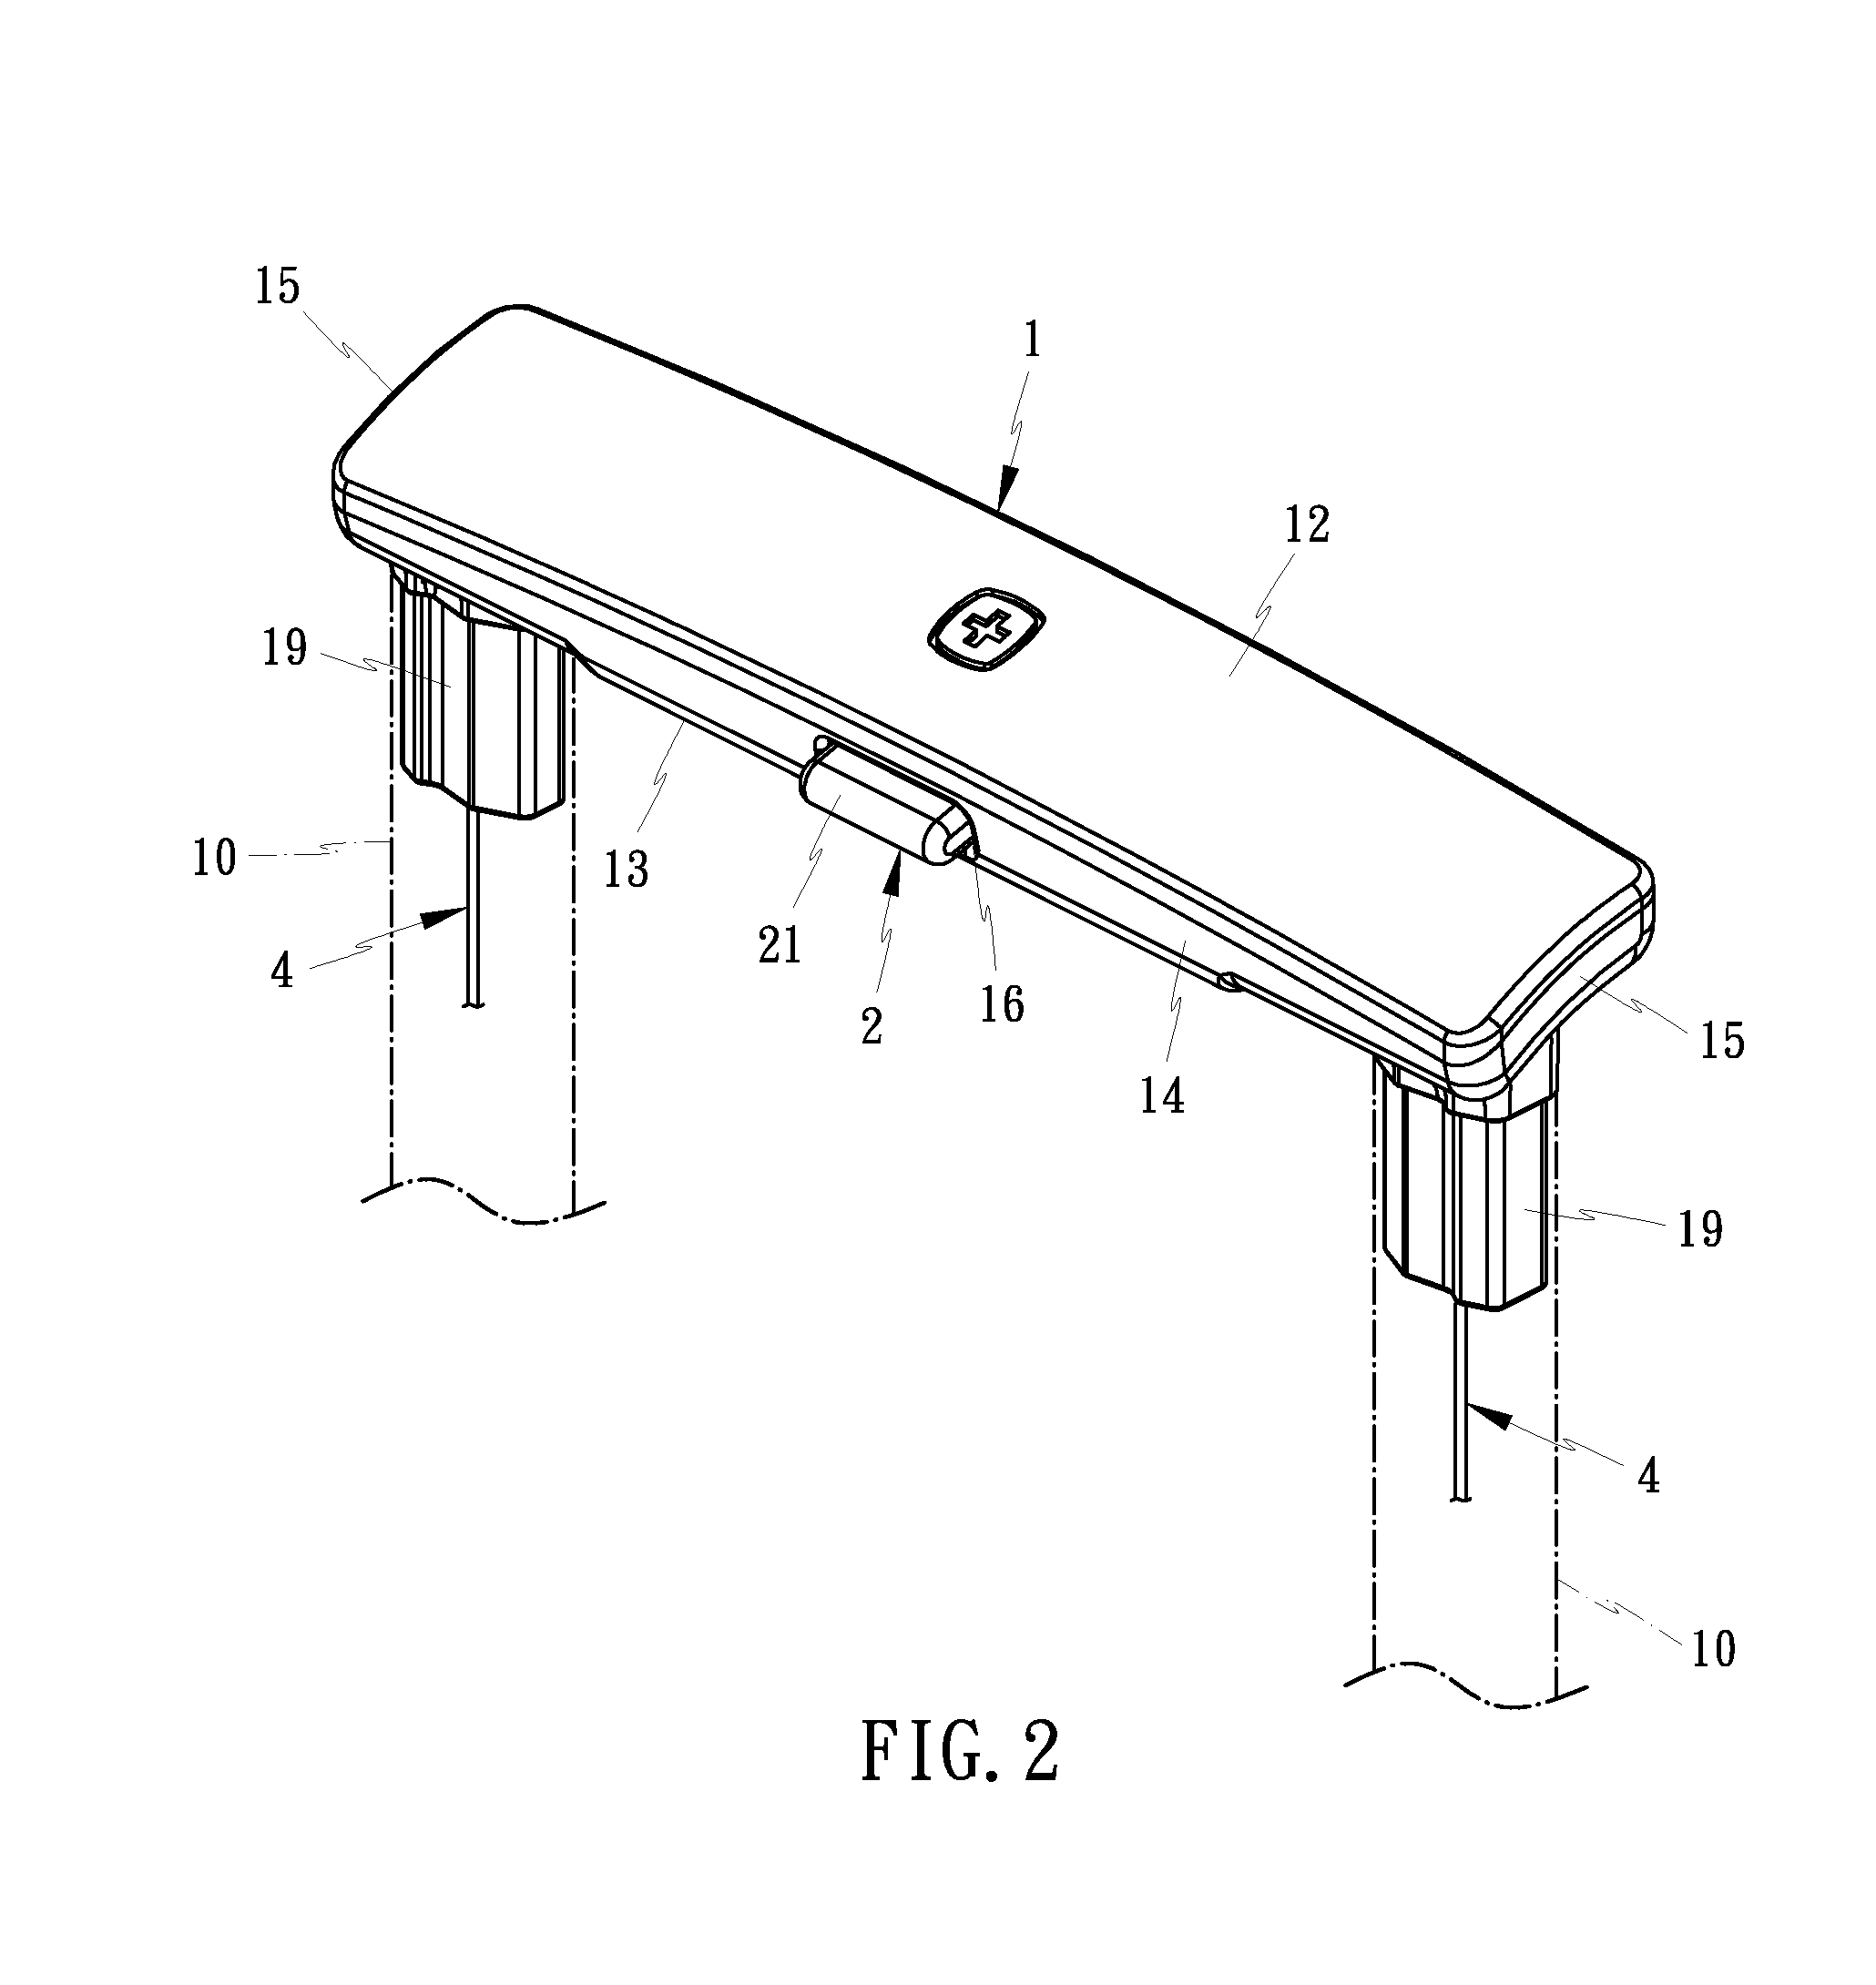 Luggage handle structure